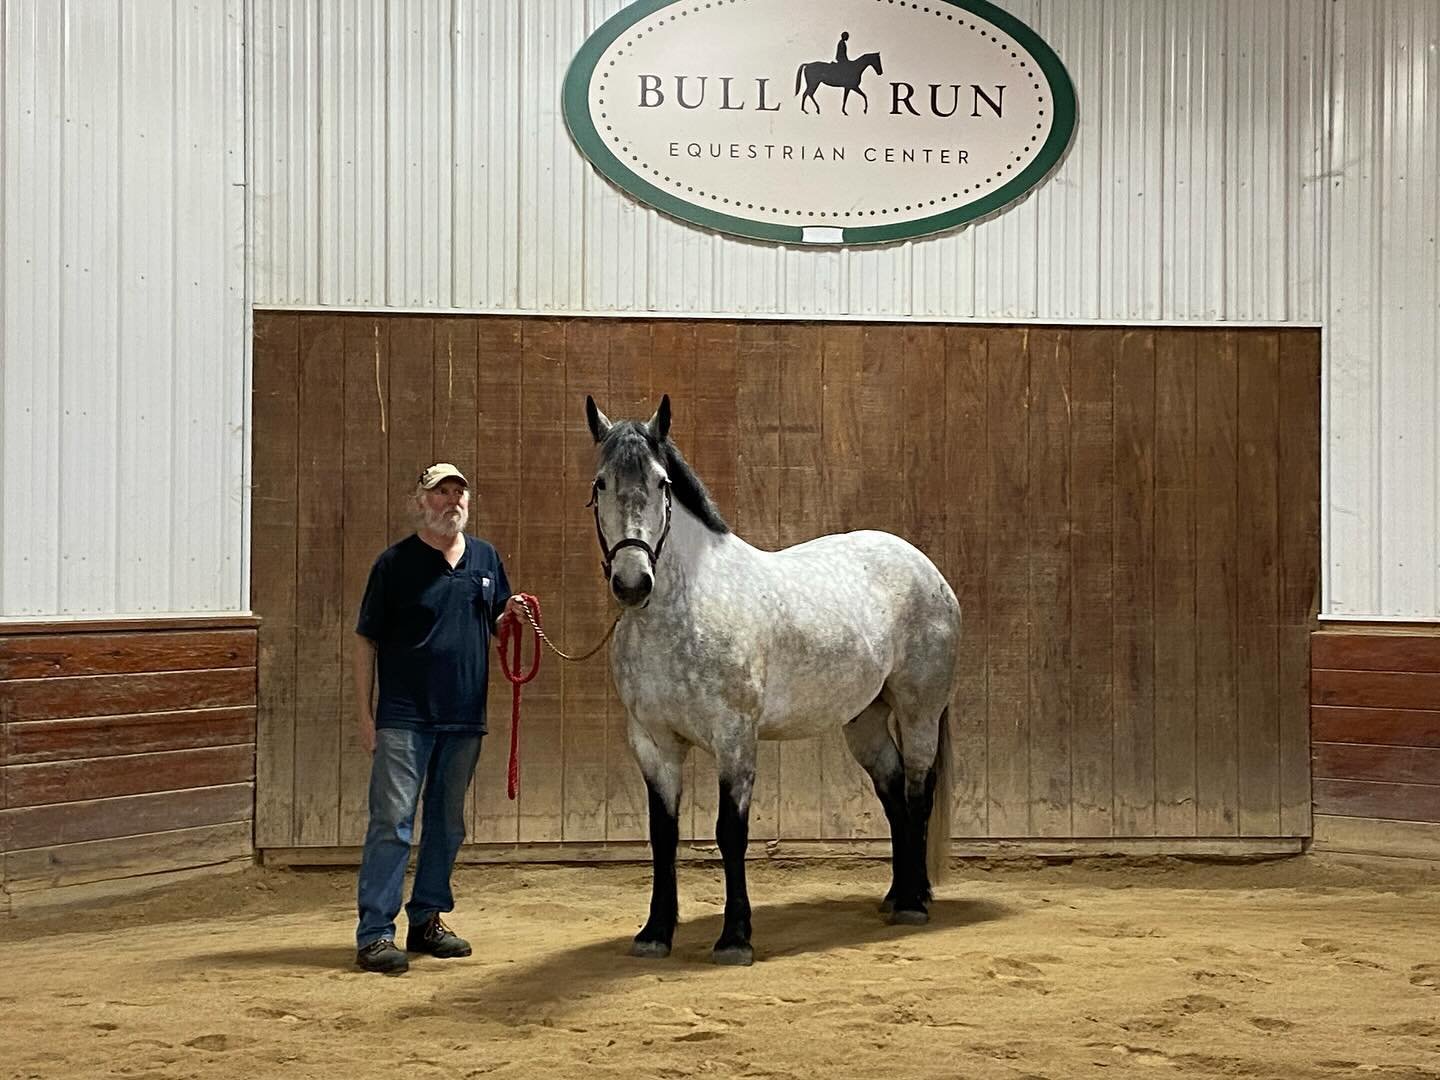 We are so excited to welcome Kathy and Mike and their gorgeous horse Slade to our Bull Run fam!! ☺️💚🤍